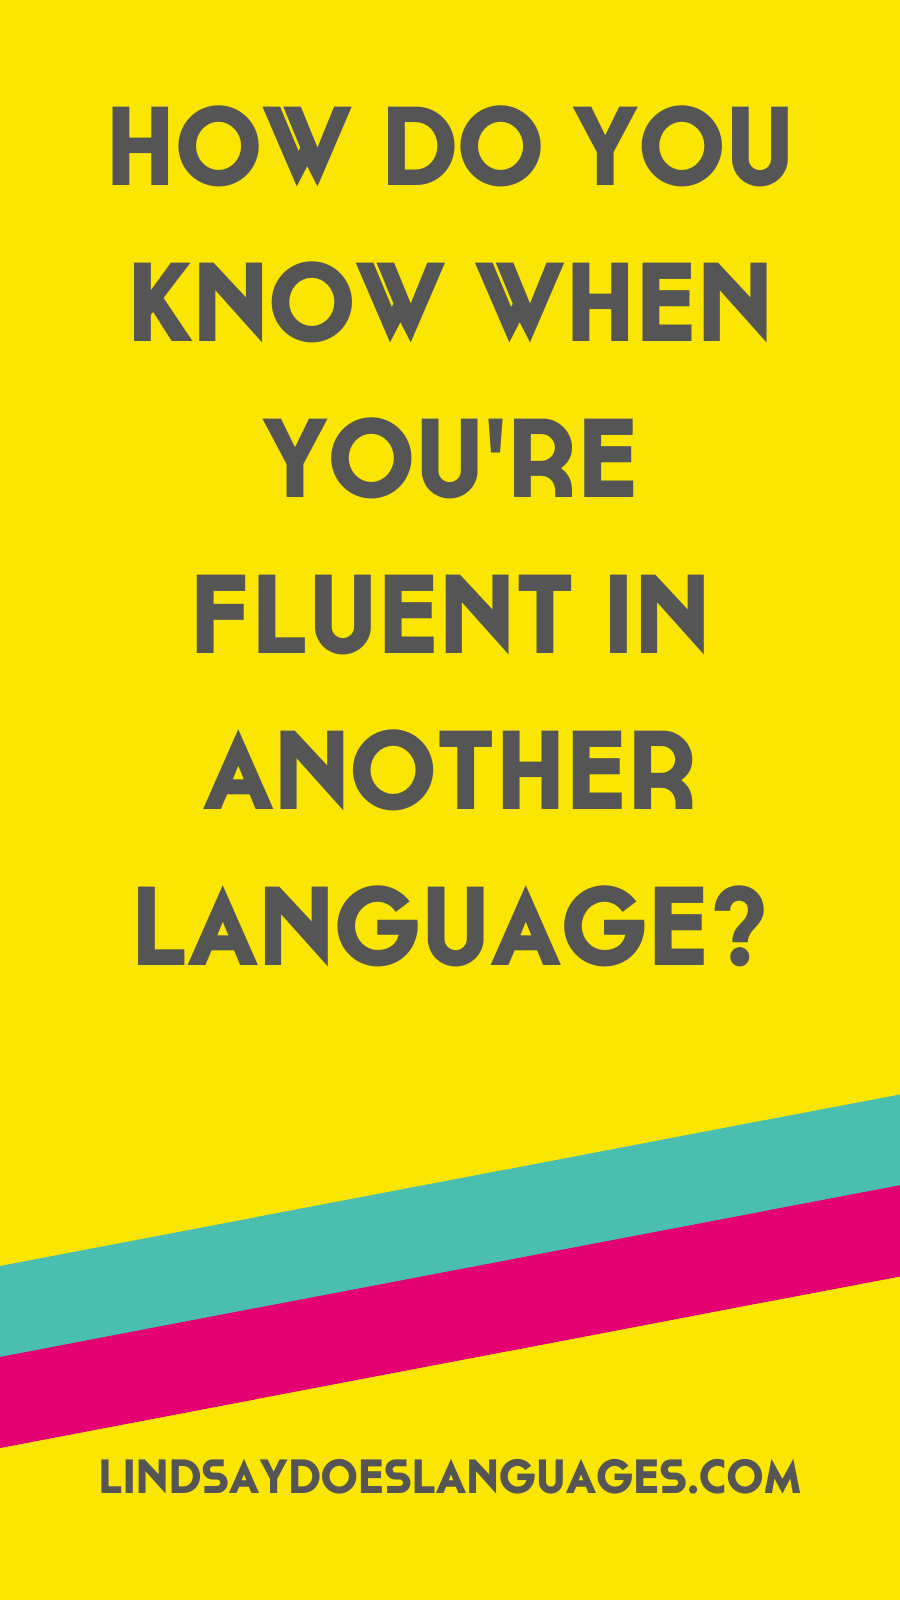 How do you know when you're fluent in a language? Fluency is a tricky concept that can feel like the be all and end all. Is this really true?